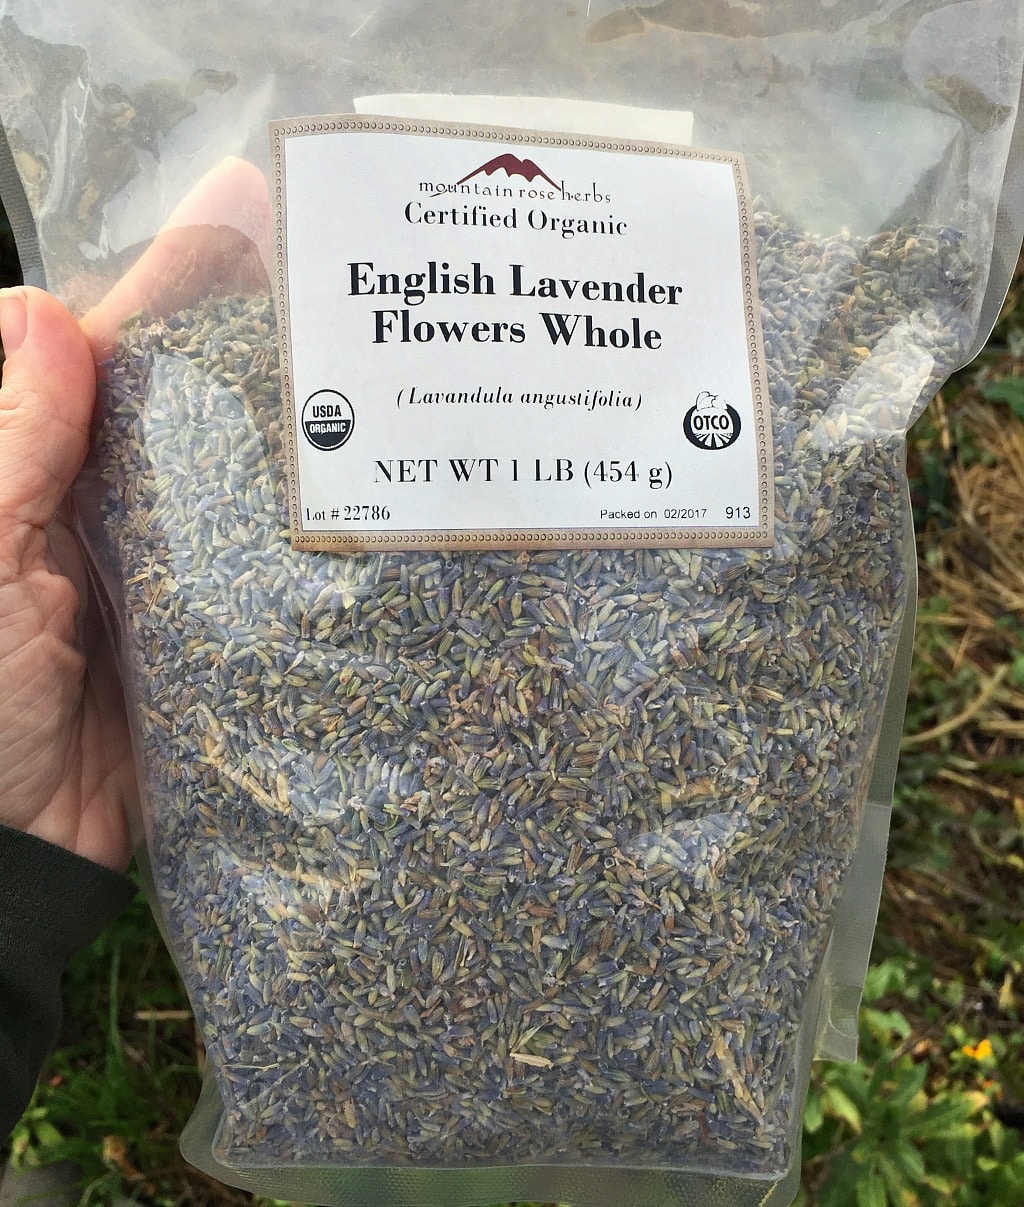 a hand holding a bag of Mountain Rose Herbs dried lavender flowers